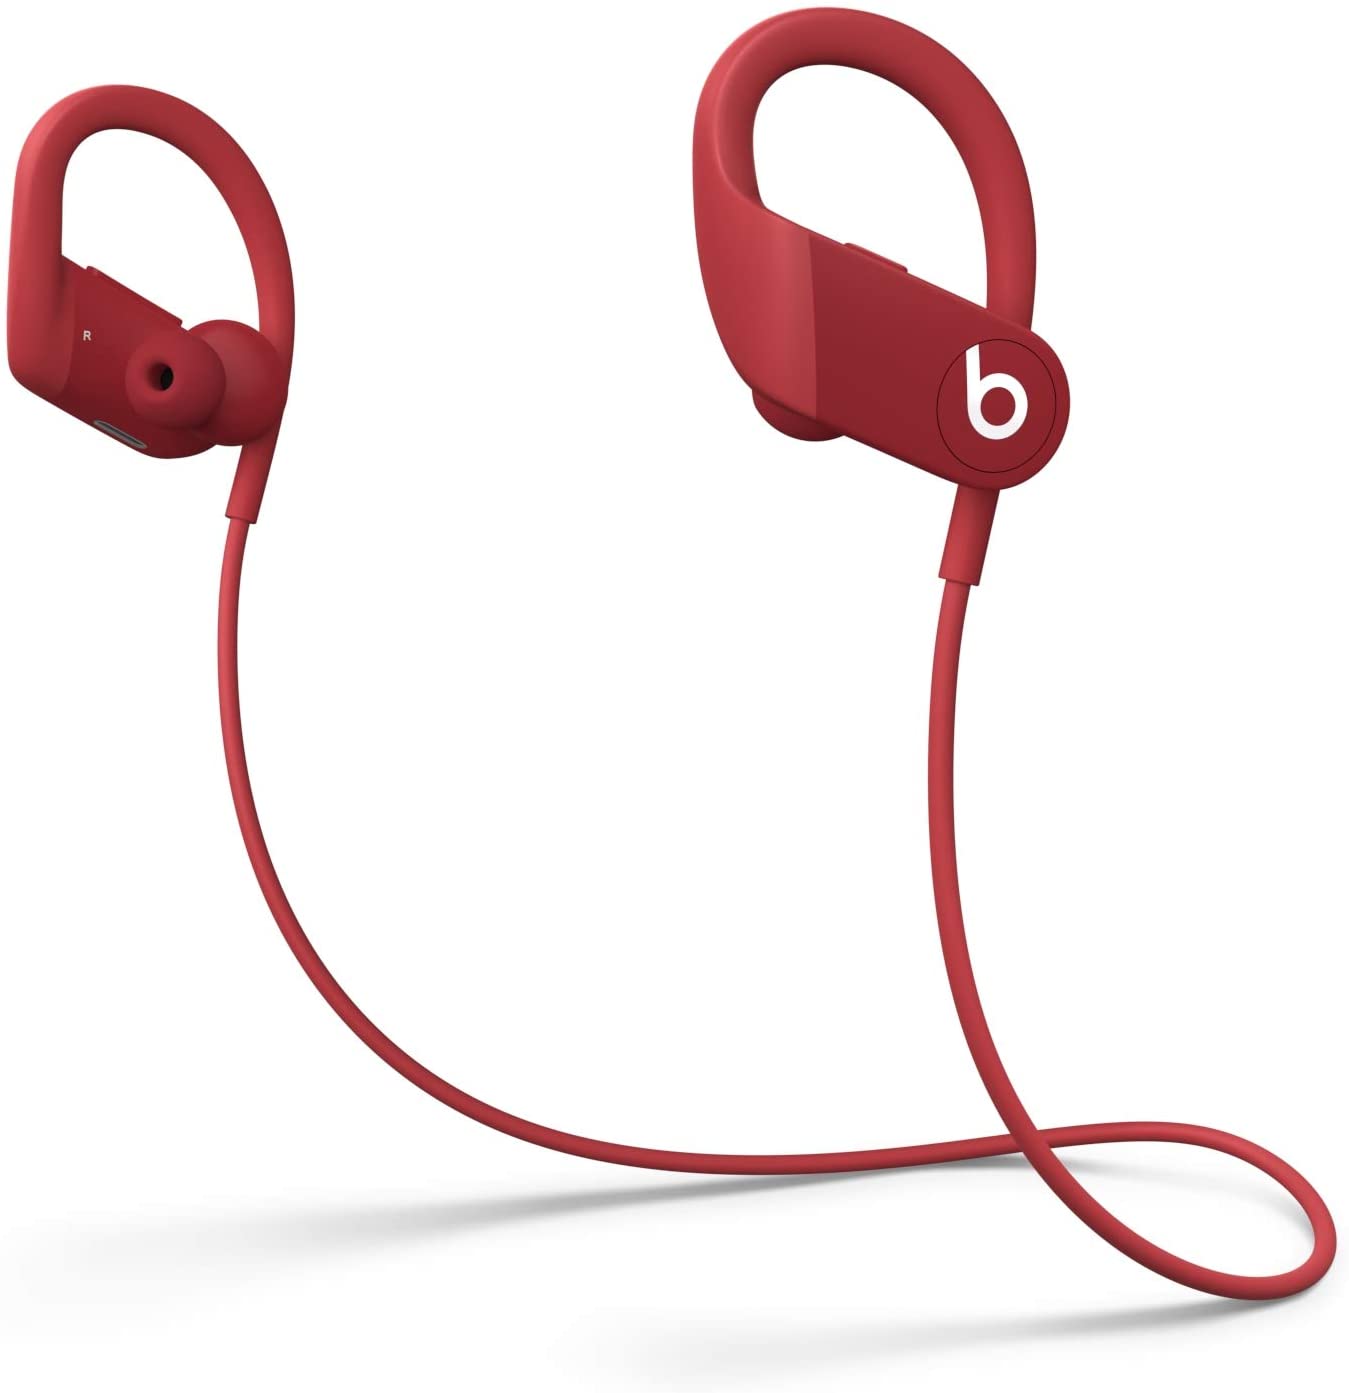 Beats by Dr. Dre Powerbeats High-Performance Wireless Earphones - 2020 - Red (Refurbished)